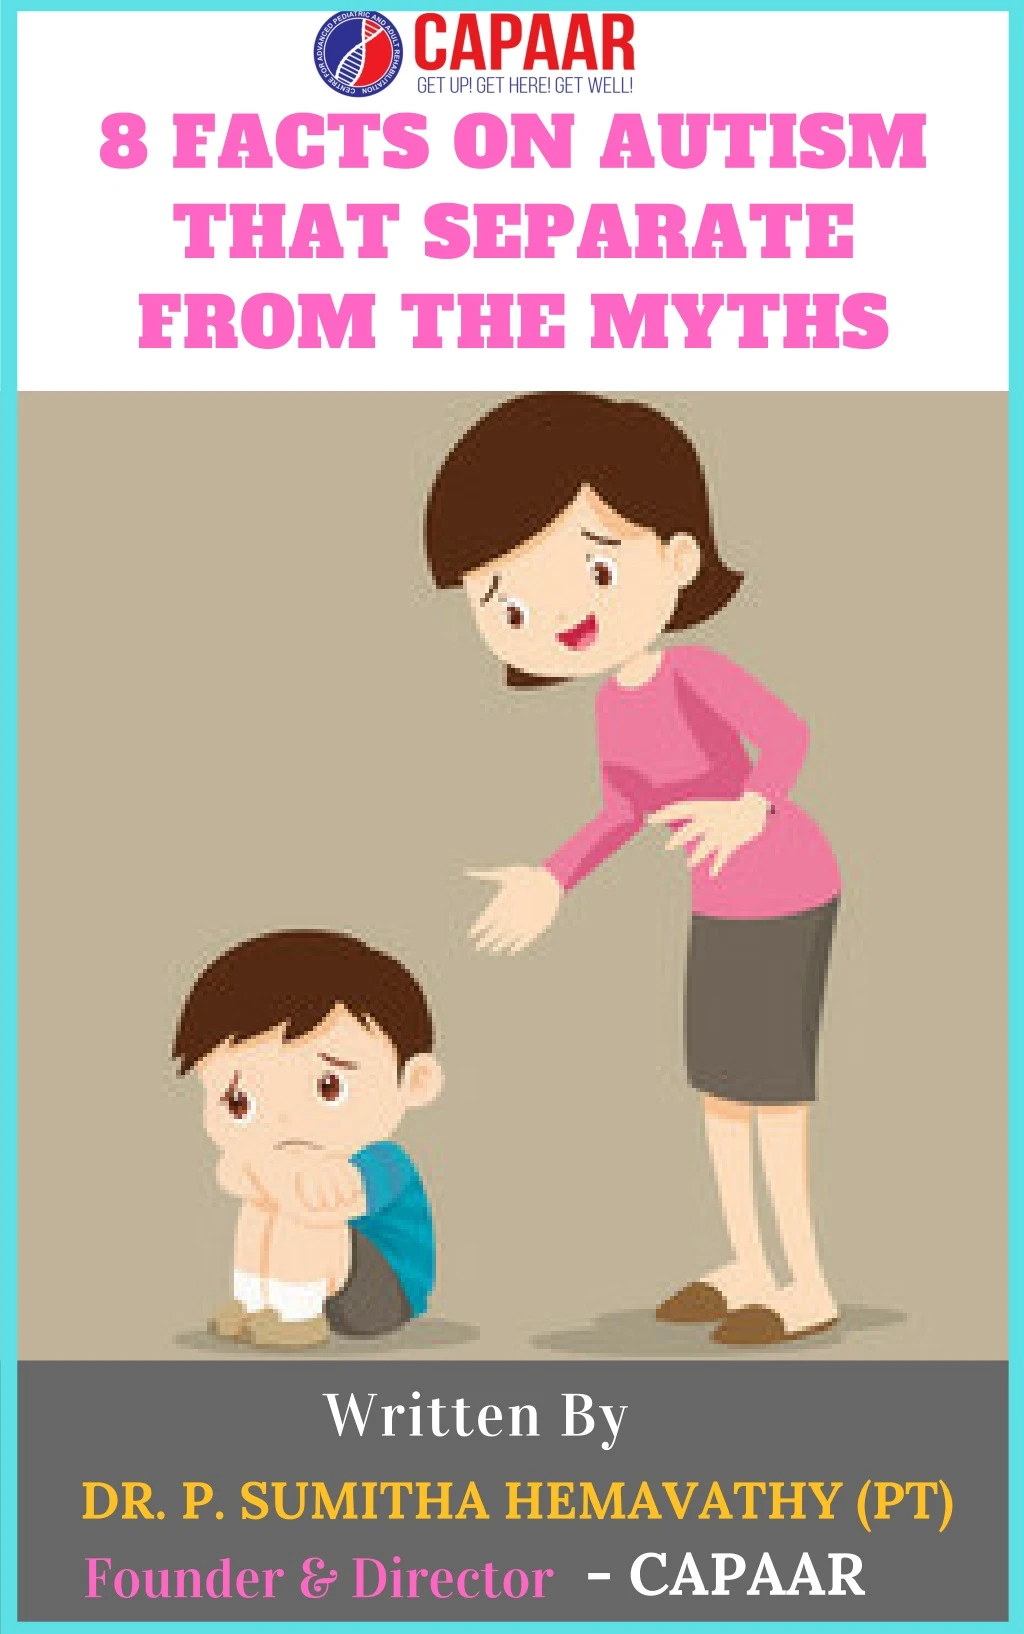 8 facts on autism that separate from the myths